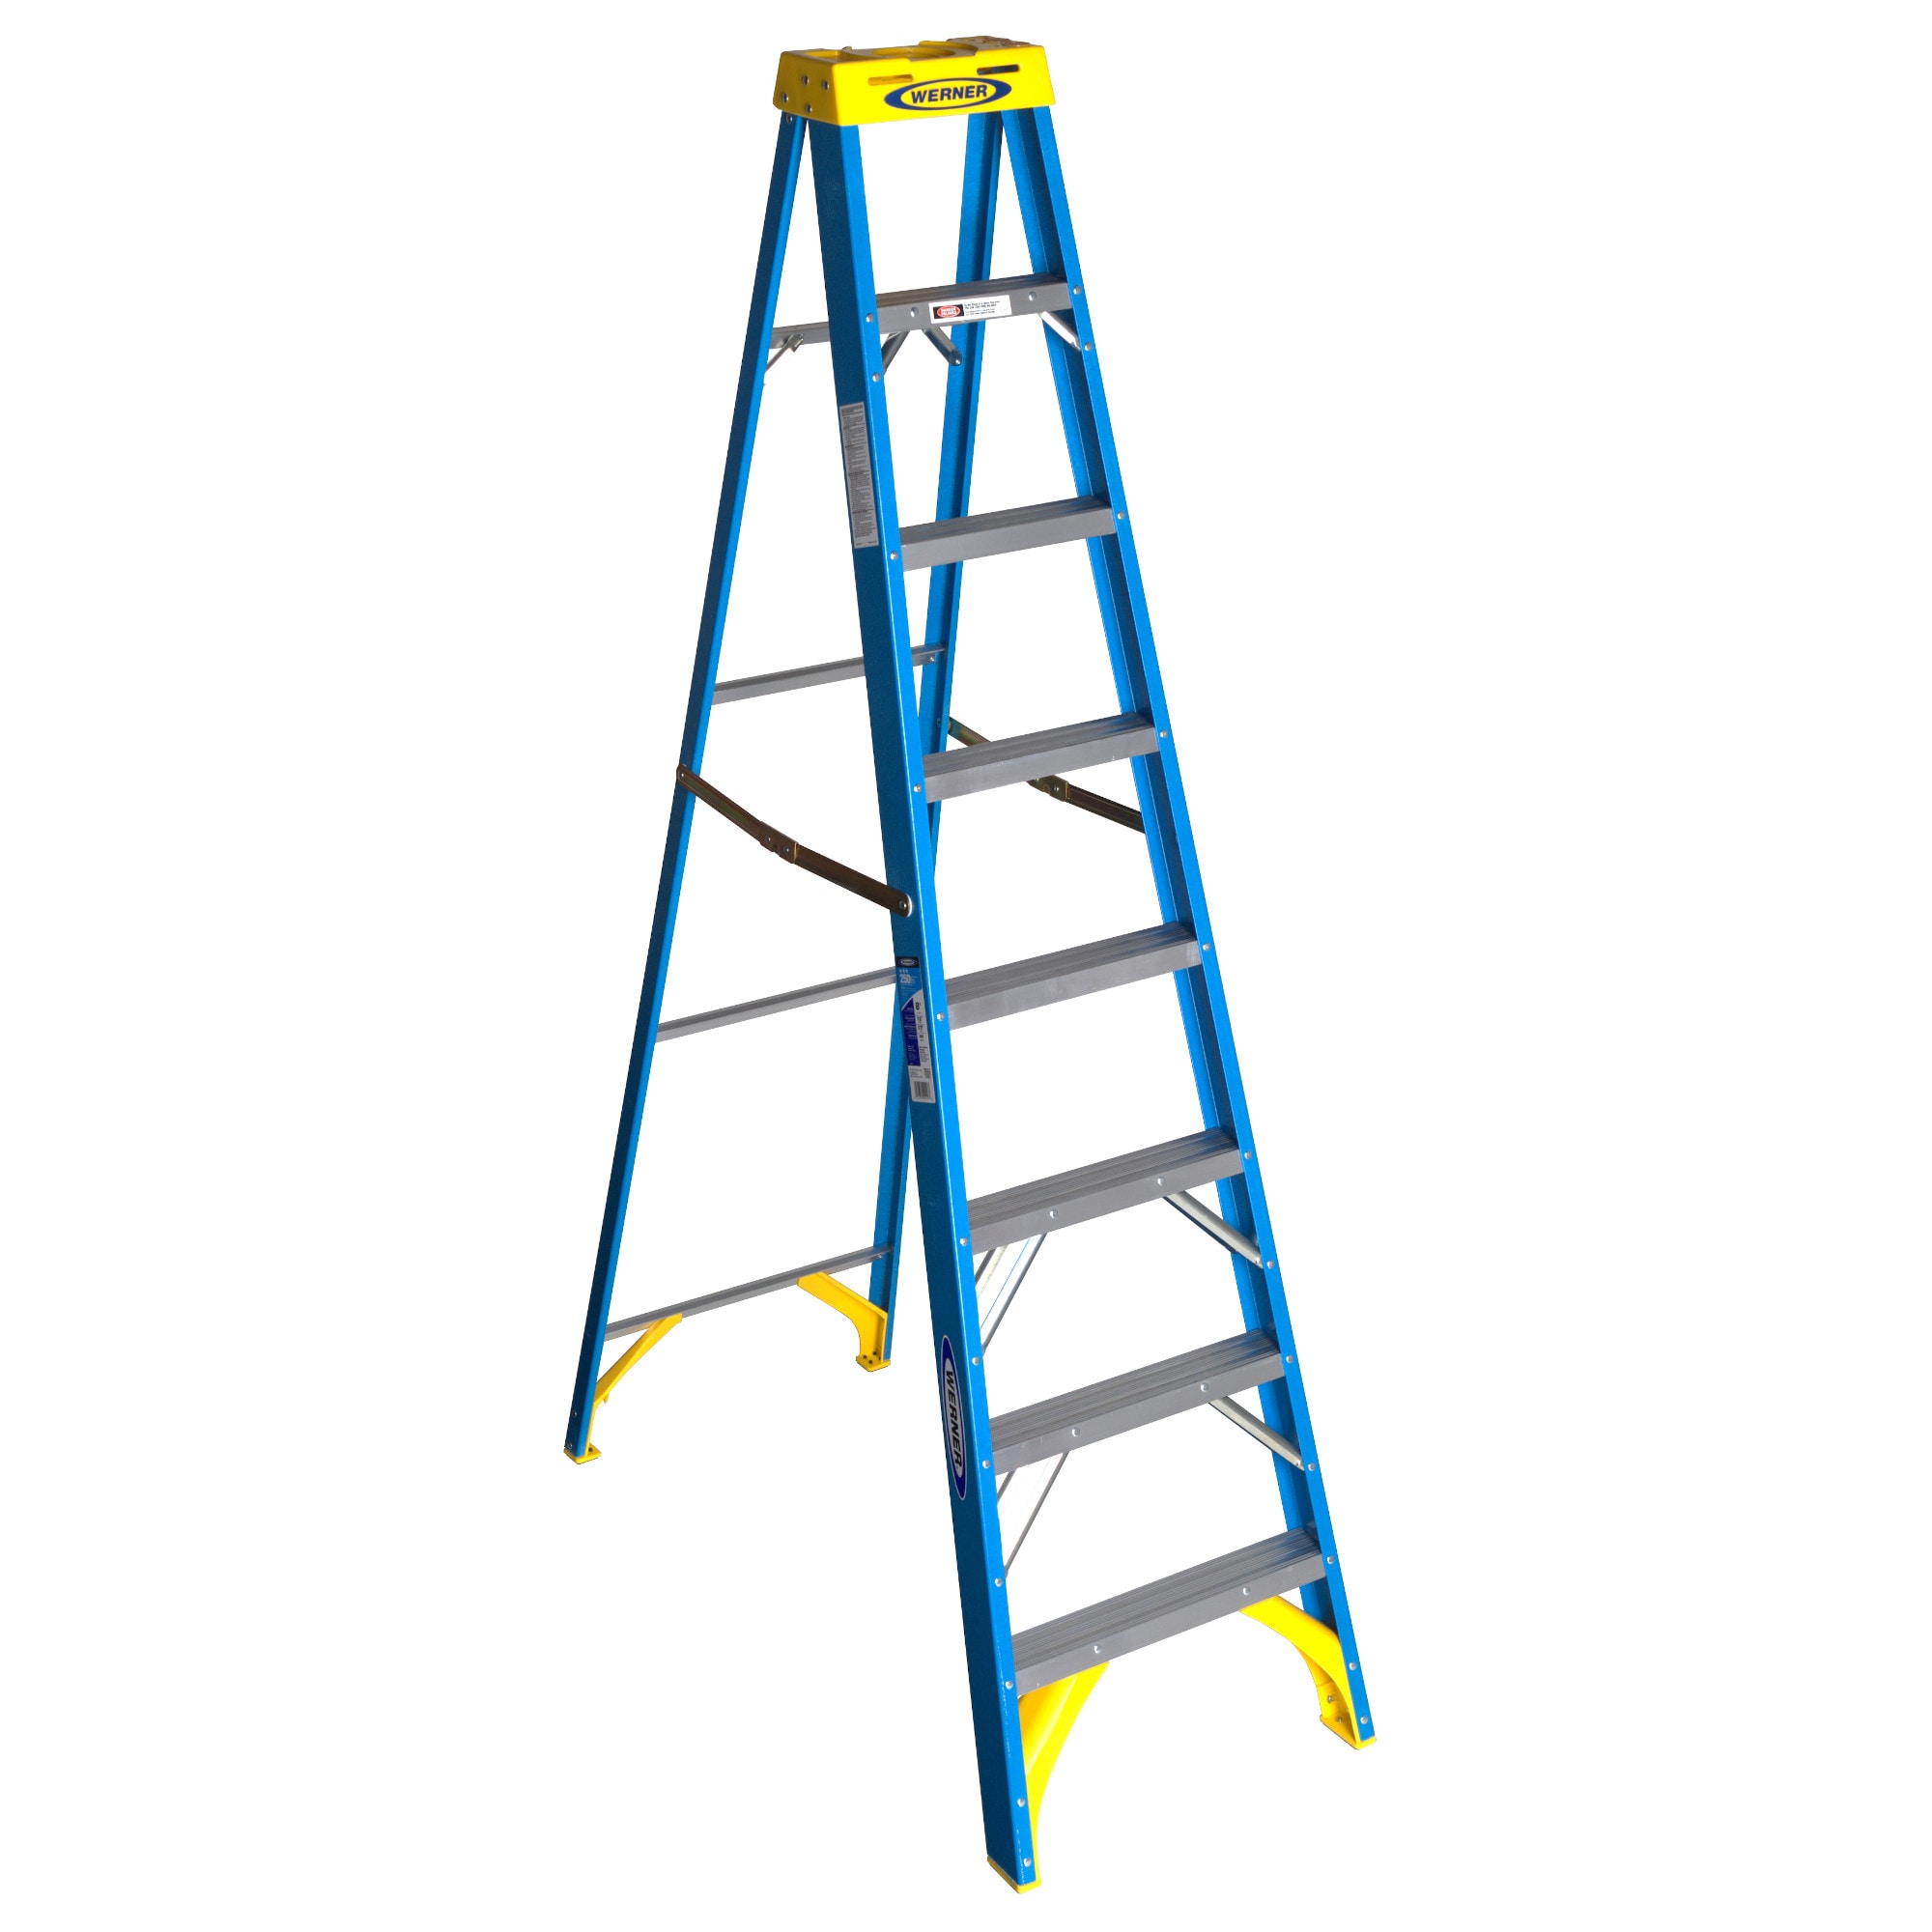 From 8" to 48" Get a FREE 8" Ladder Buy Any Bird Ladder complete with hooks 